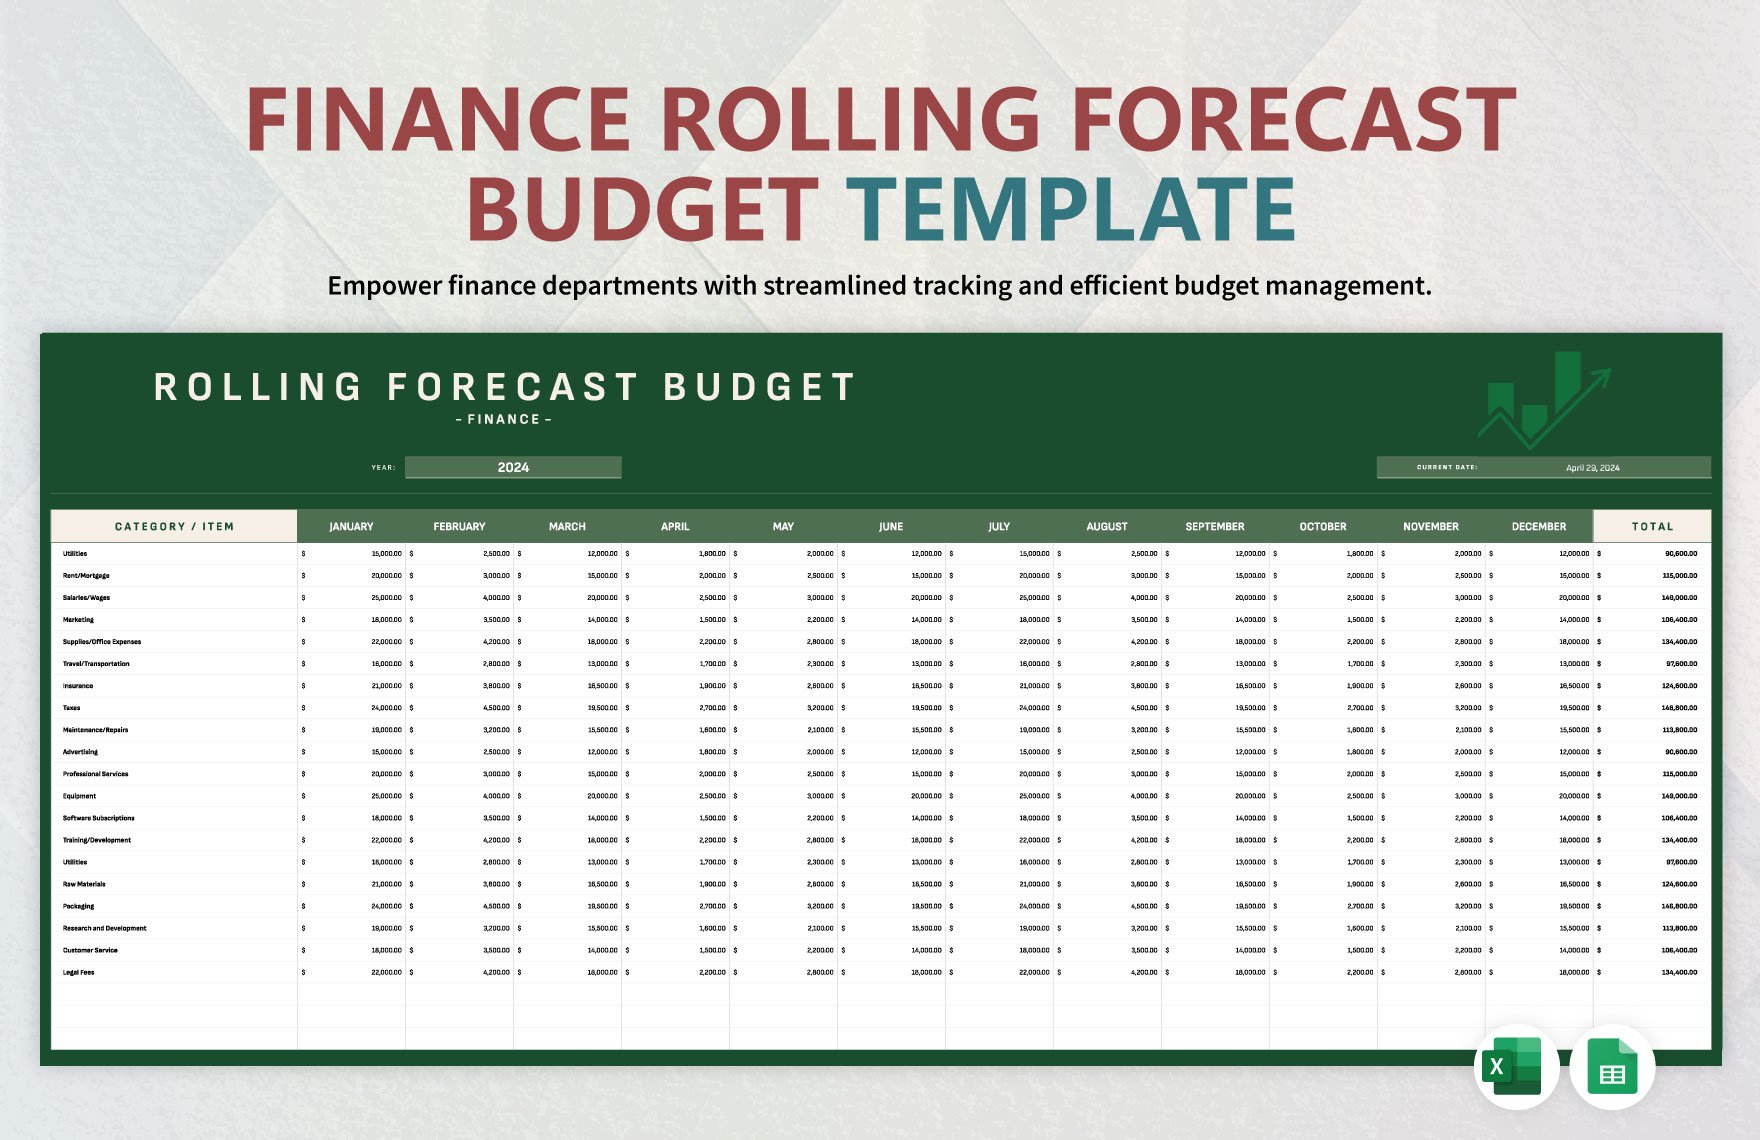 Finance Rolling Forecast Budget Template in Excel, Google Sheets